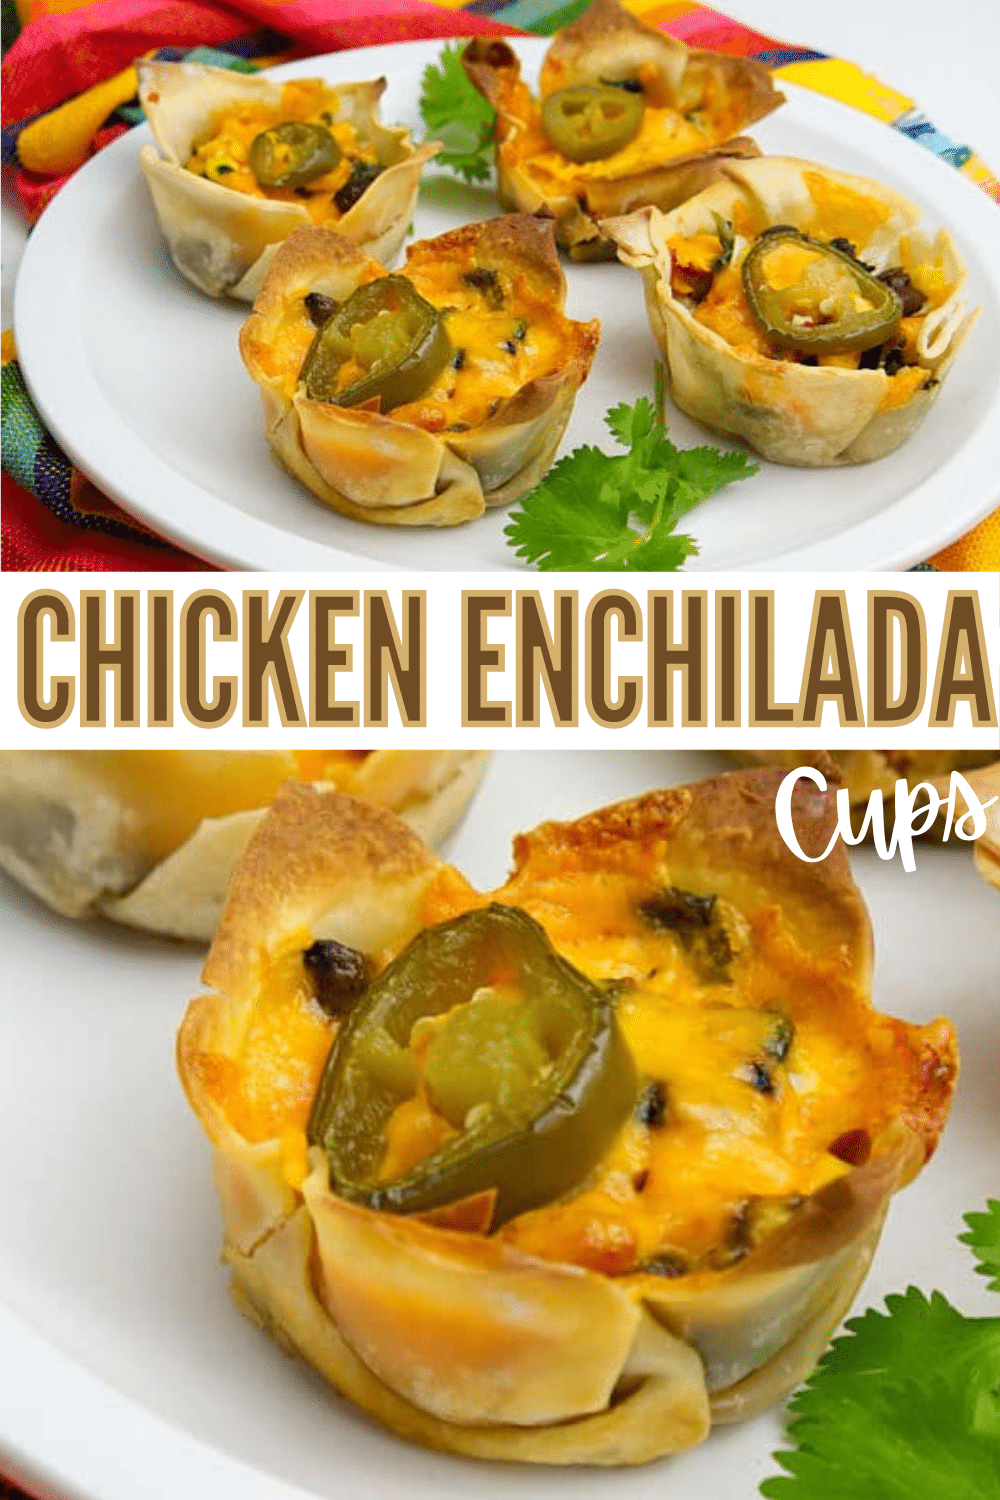 These chicken enchilada cups are so yummy and really easy to make! They work both as a tasty appetizer or kid-friendly dinner since the kids can choose their own ingredients. #appetizers #fingerfoods #Mexicanrecipes via @wondermomwannab